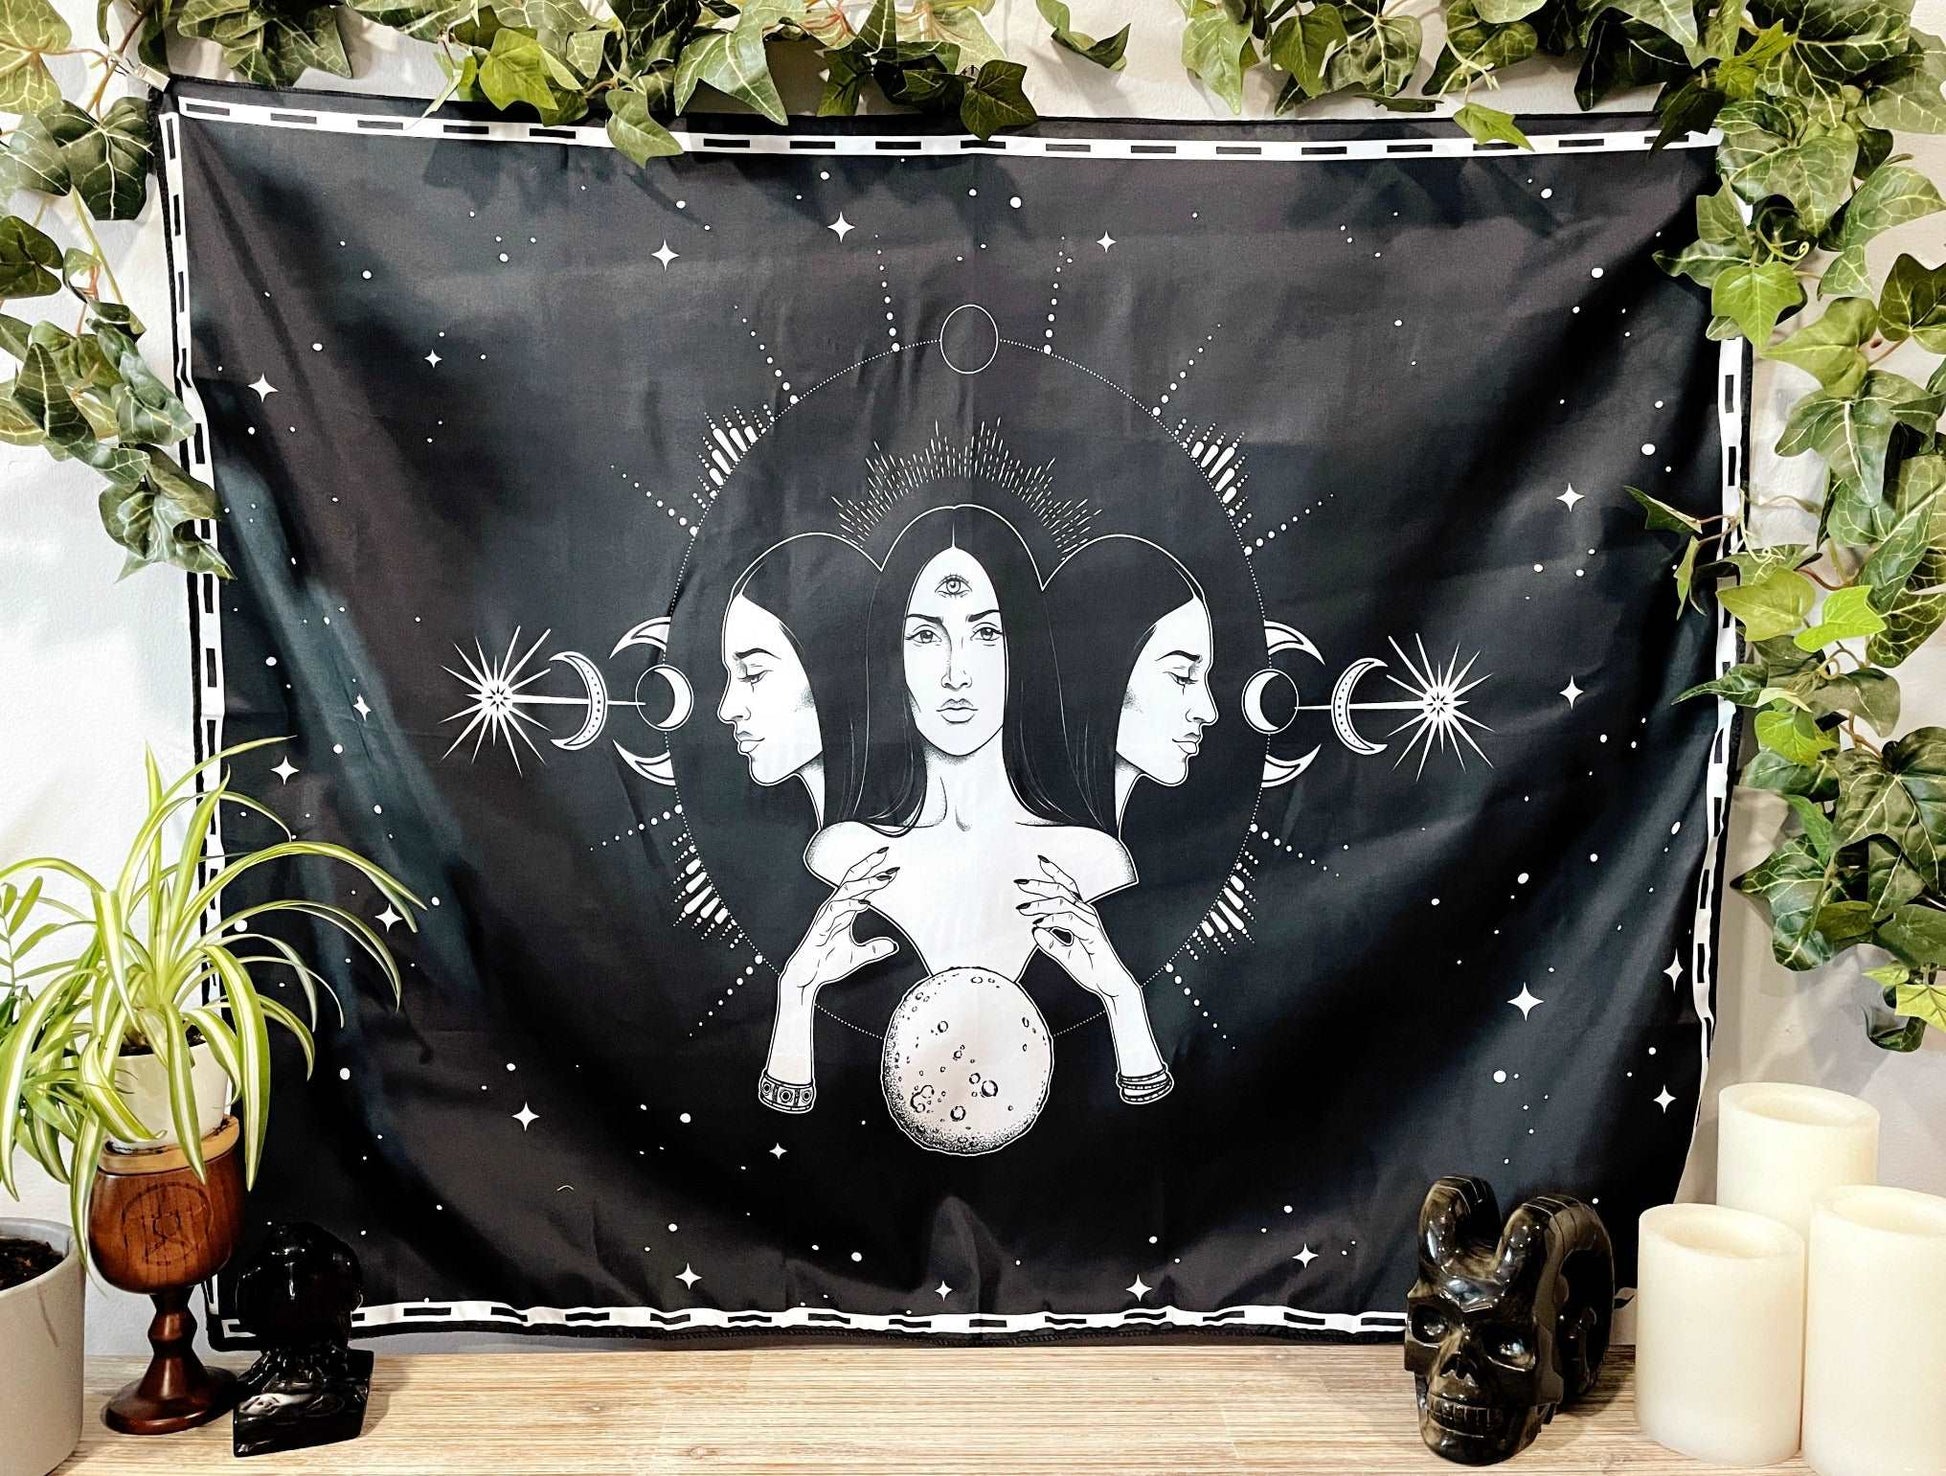 Pictured is a large wall tapestry with a black background and three women representing three goddesses or Hecate printed in white on it.